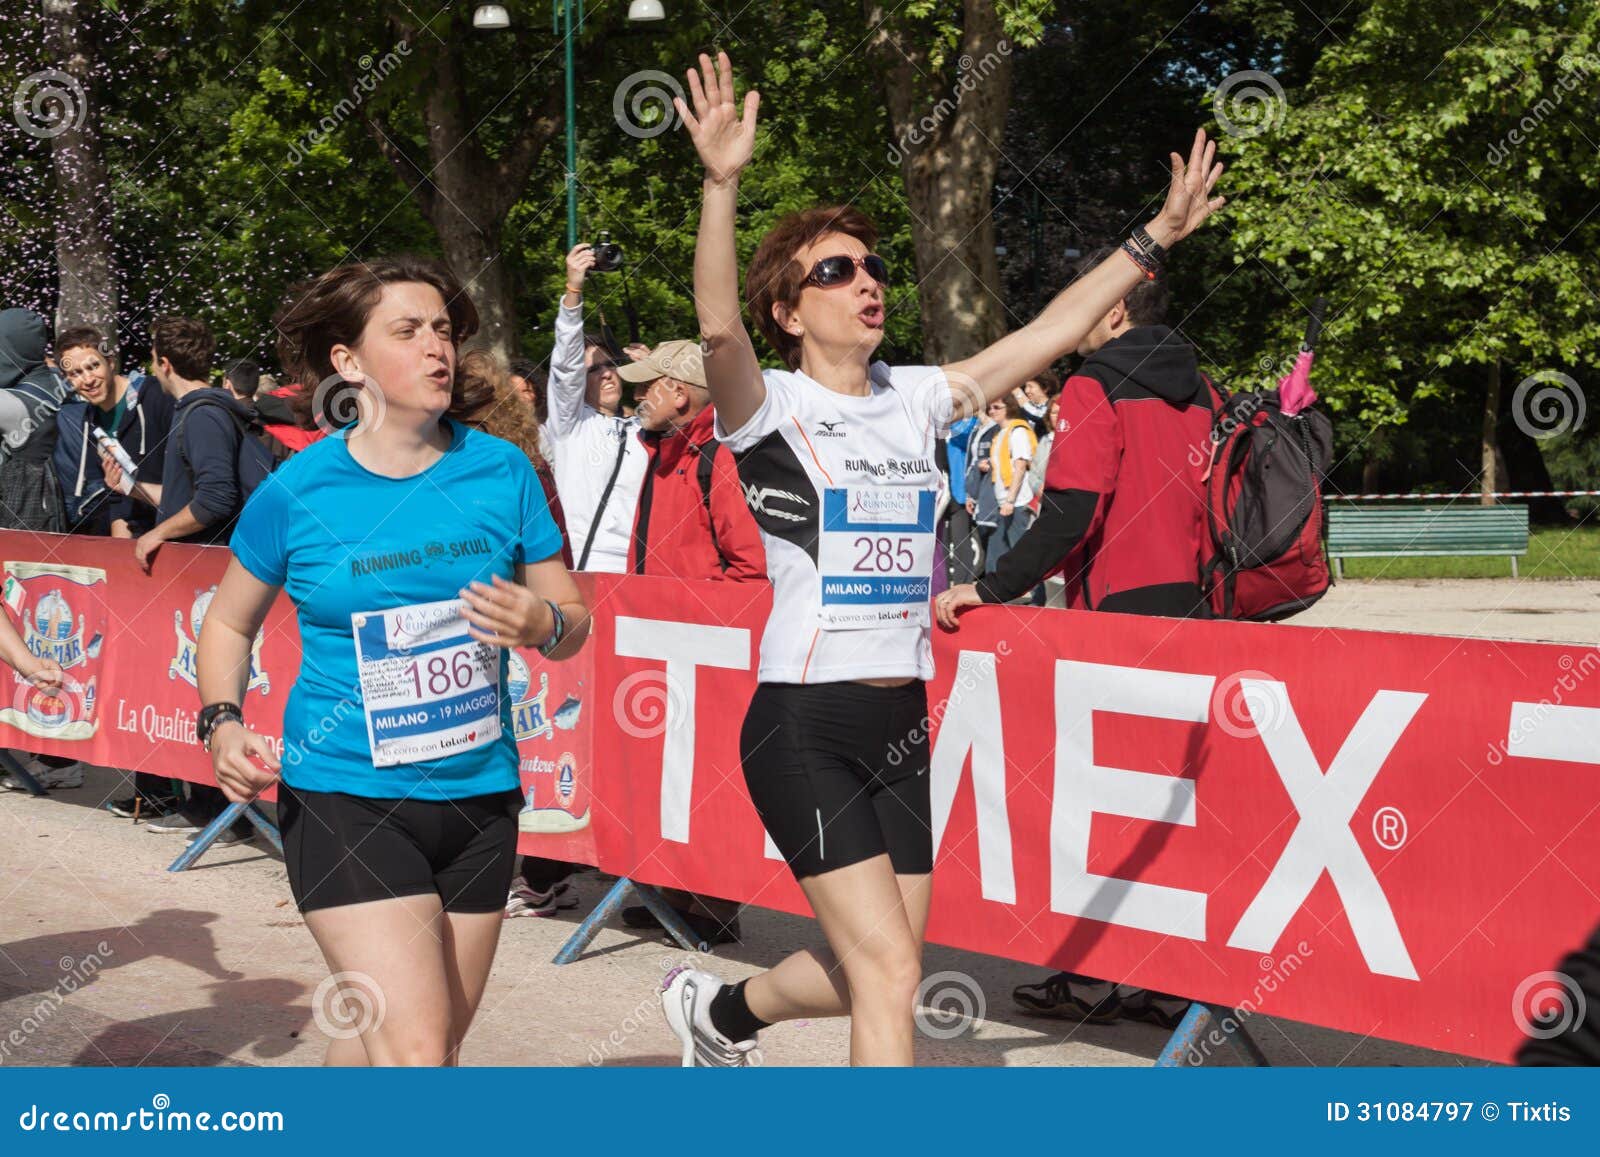 Thousands Of Women Take Part In The Avon Running 13 Editorial Photography Image Of Milan Competition